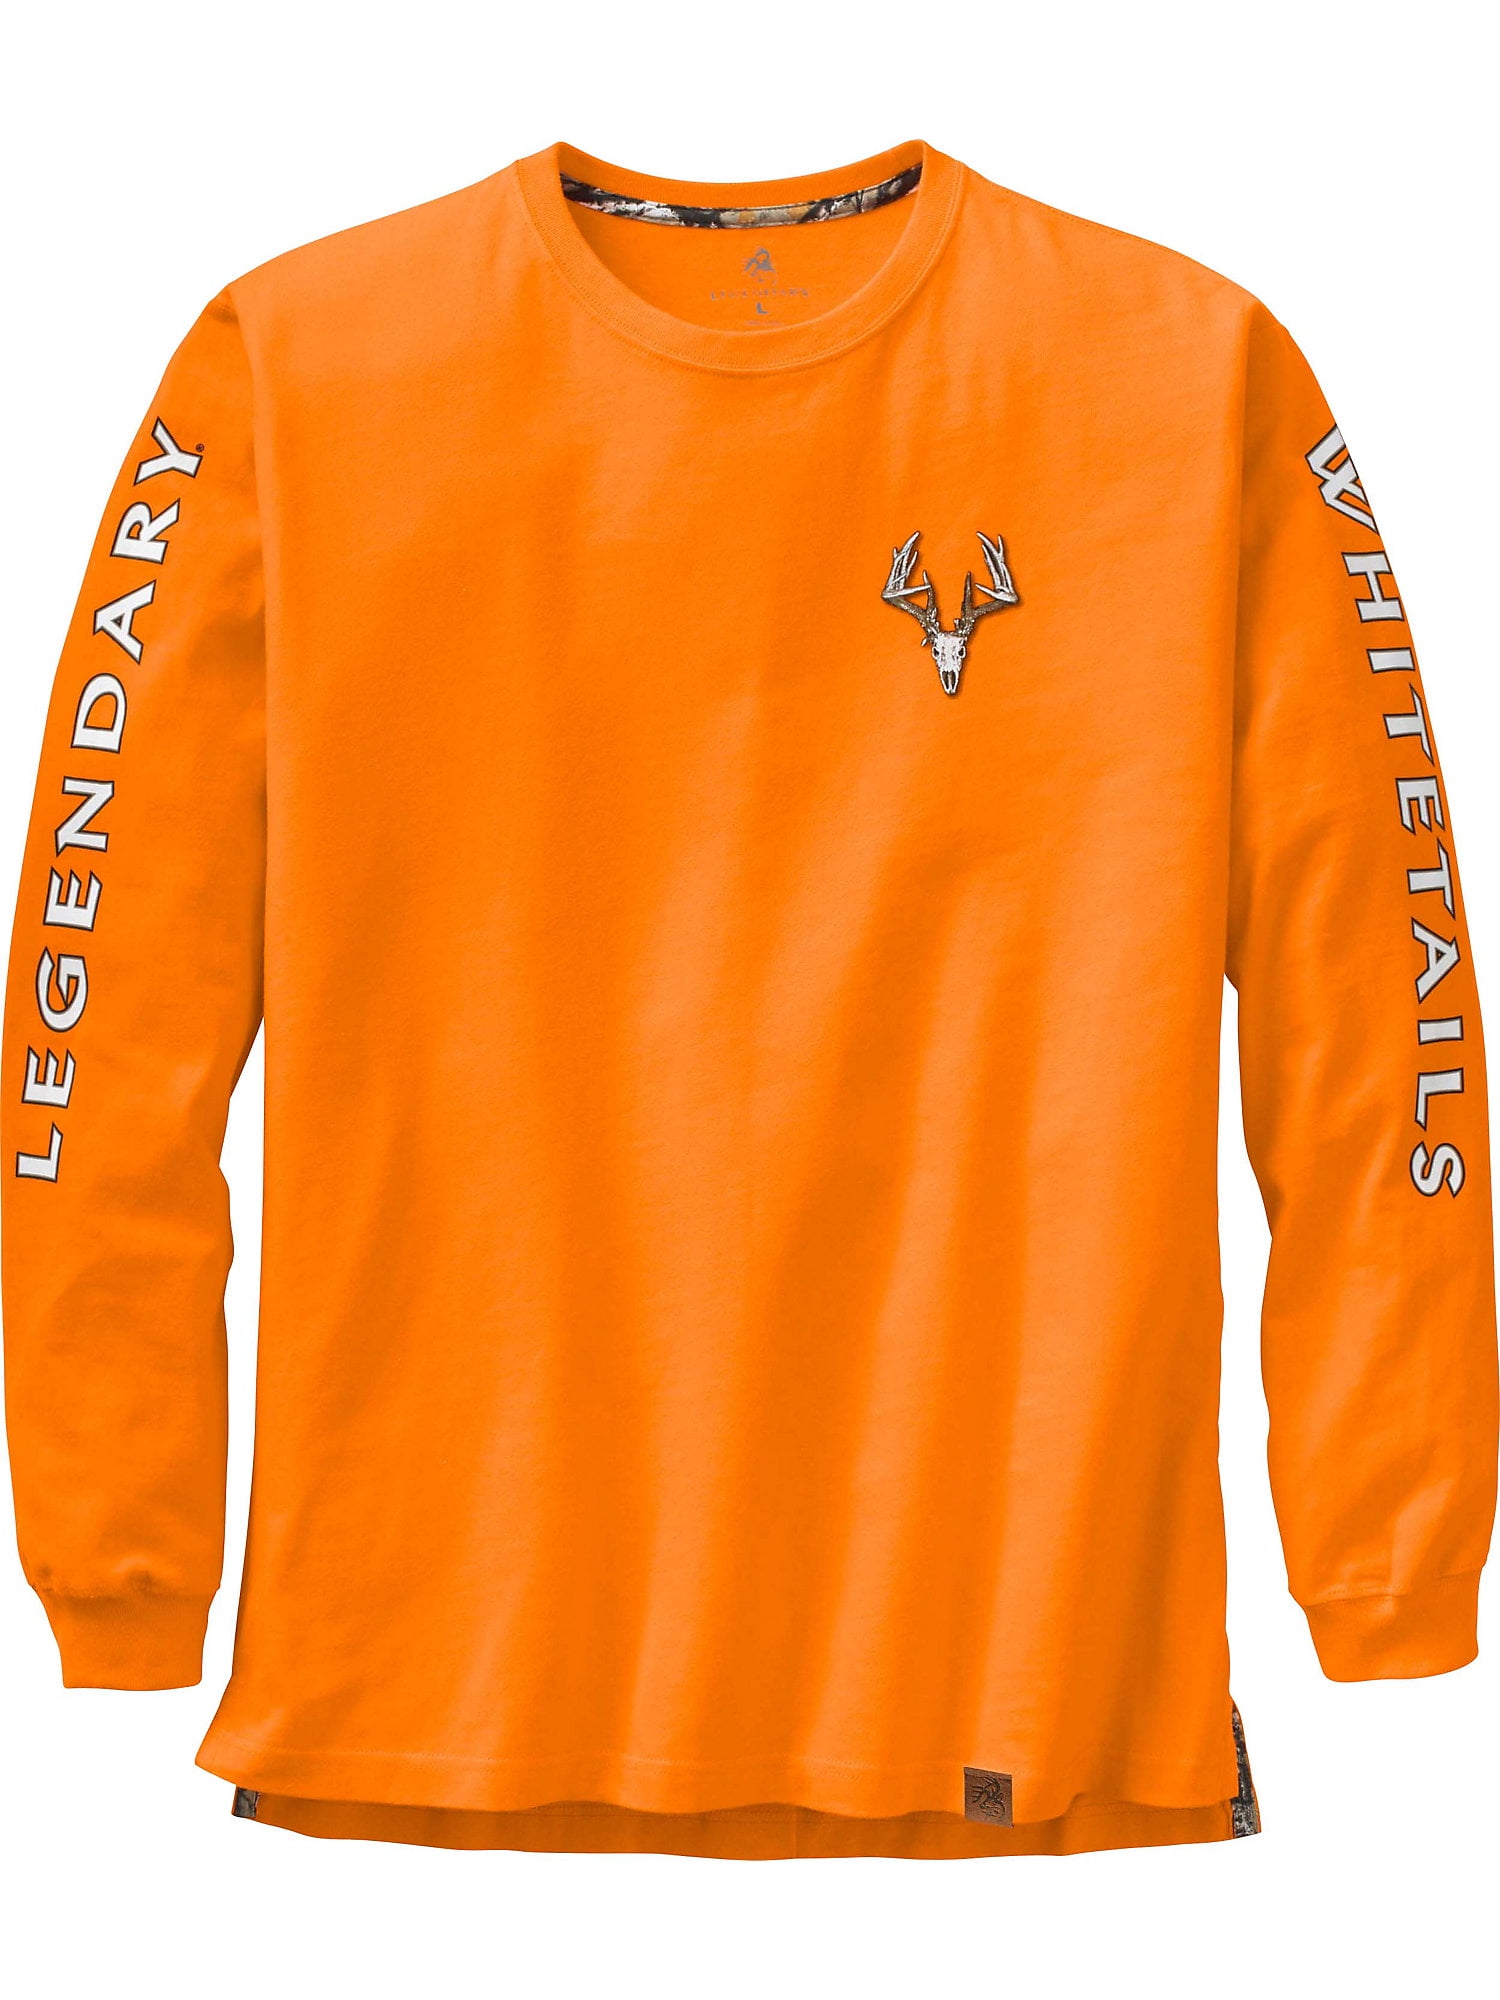 Legendary Whitetails Mens Non-Typical Series Long Sleeve T-Shirt